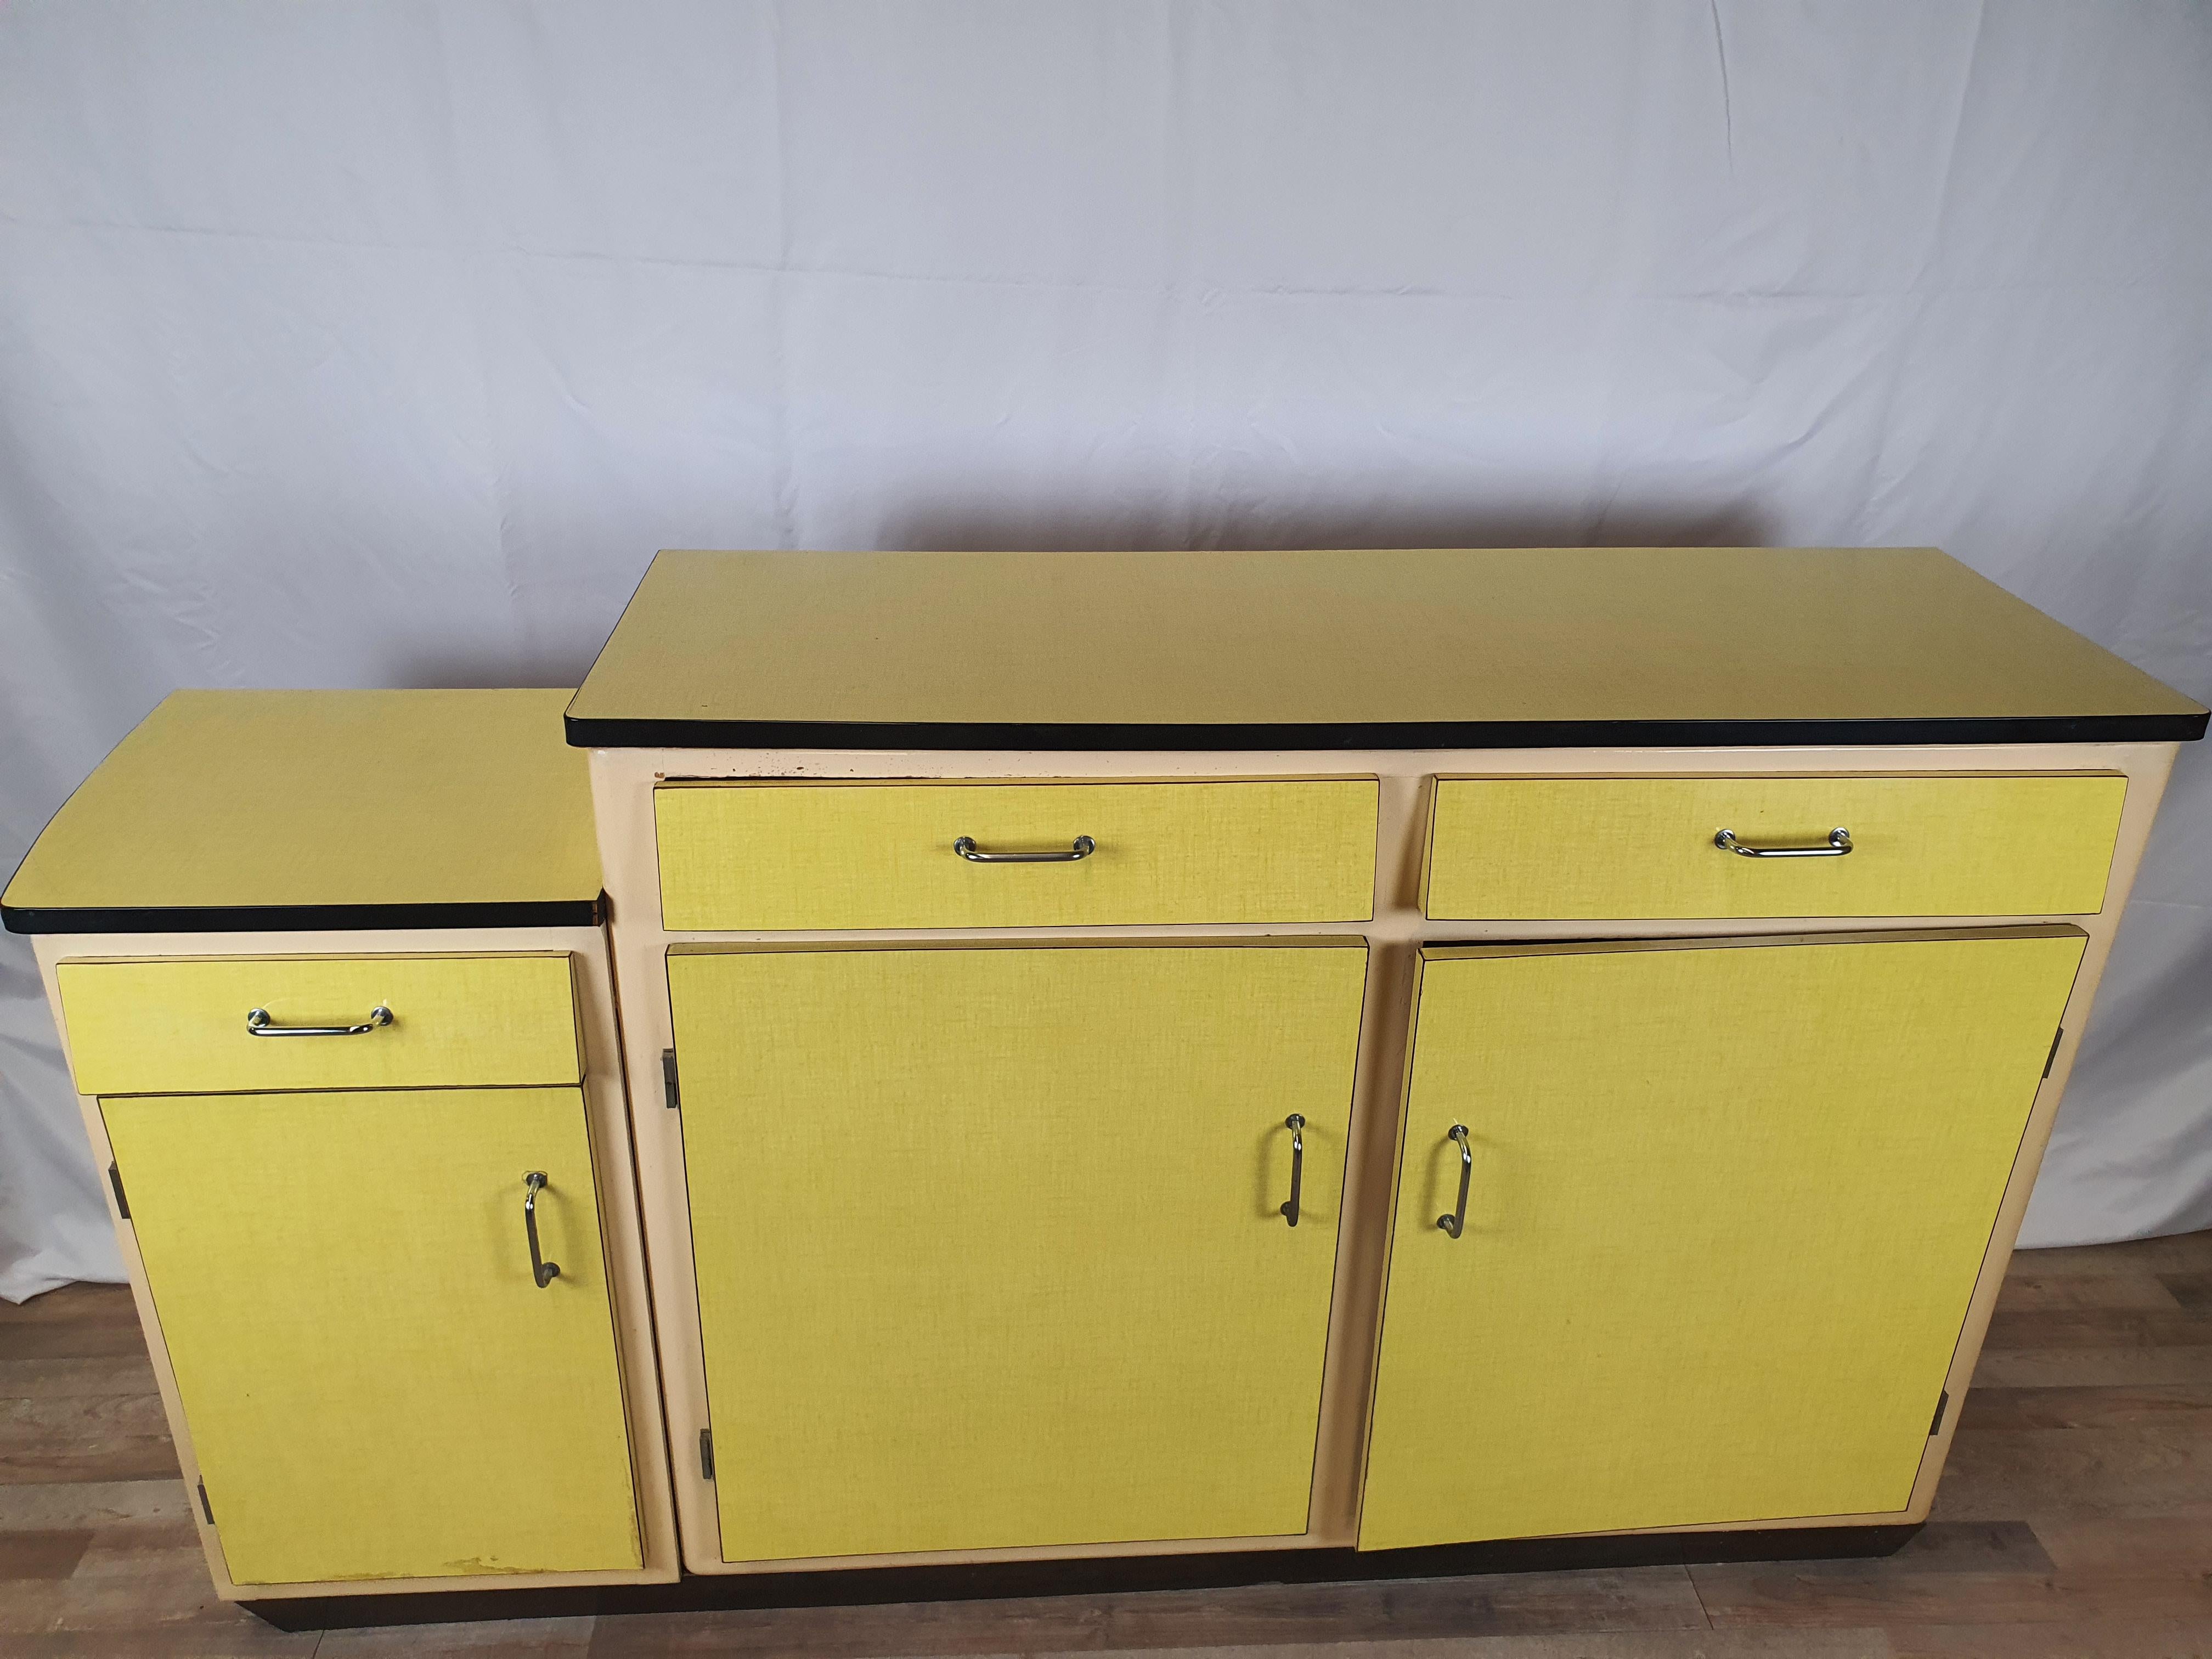 Modern sideboard in formica with fir interiors, ideal for kitchens or vintage and antique dining room furniture.

Particular for the white and yellow color which give contrast to the piece of furniture and make it a beautiful scenographic design